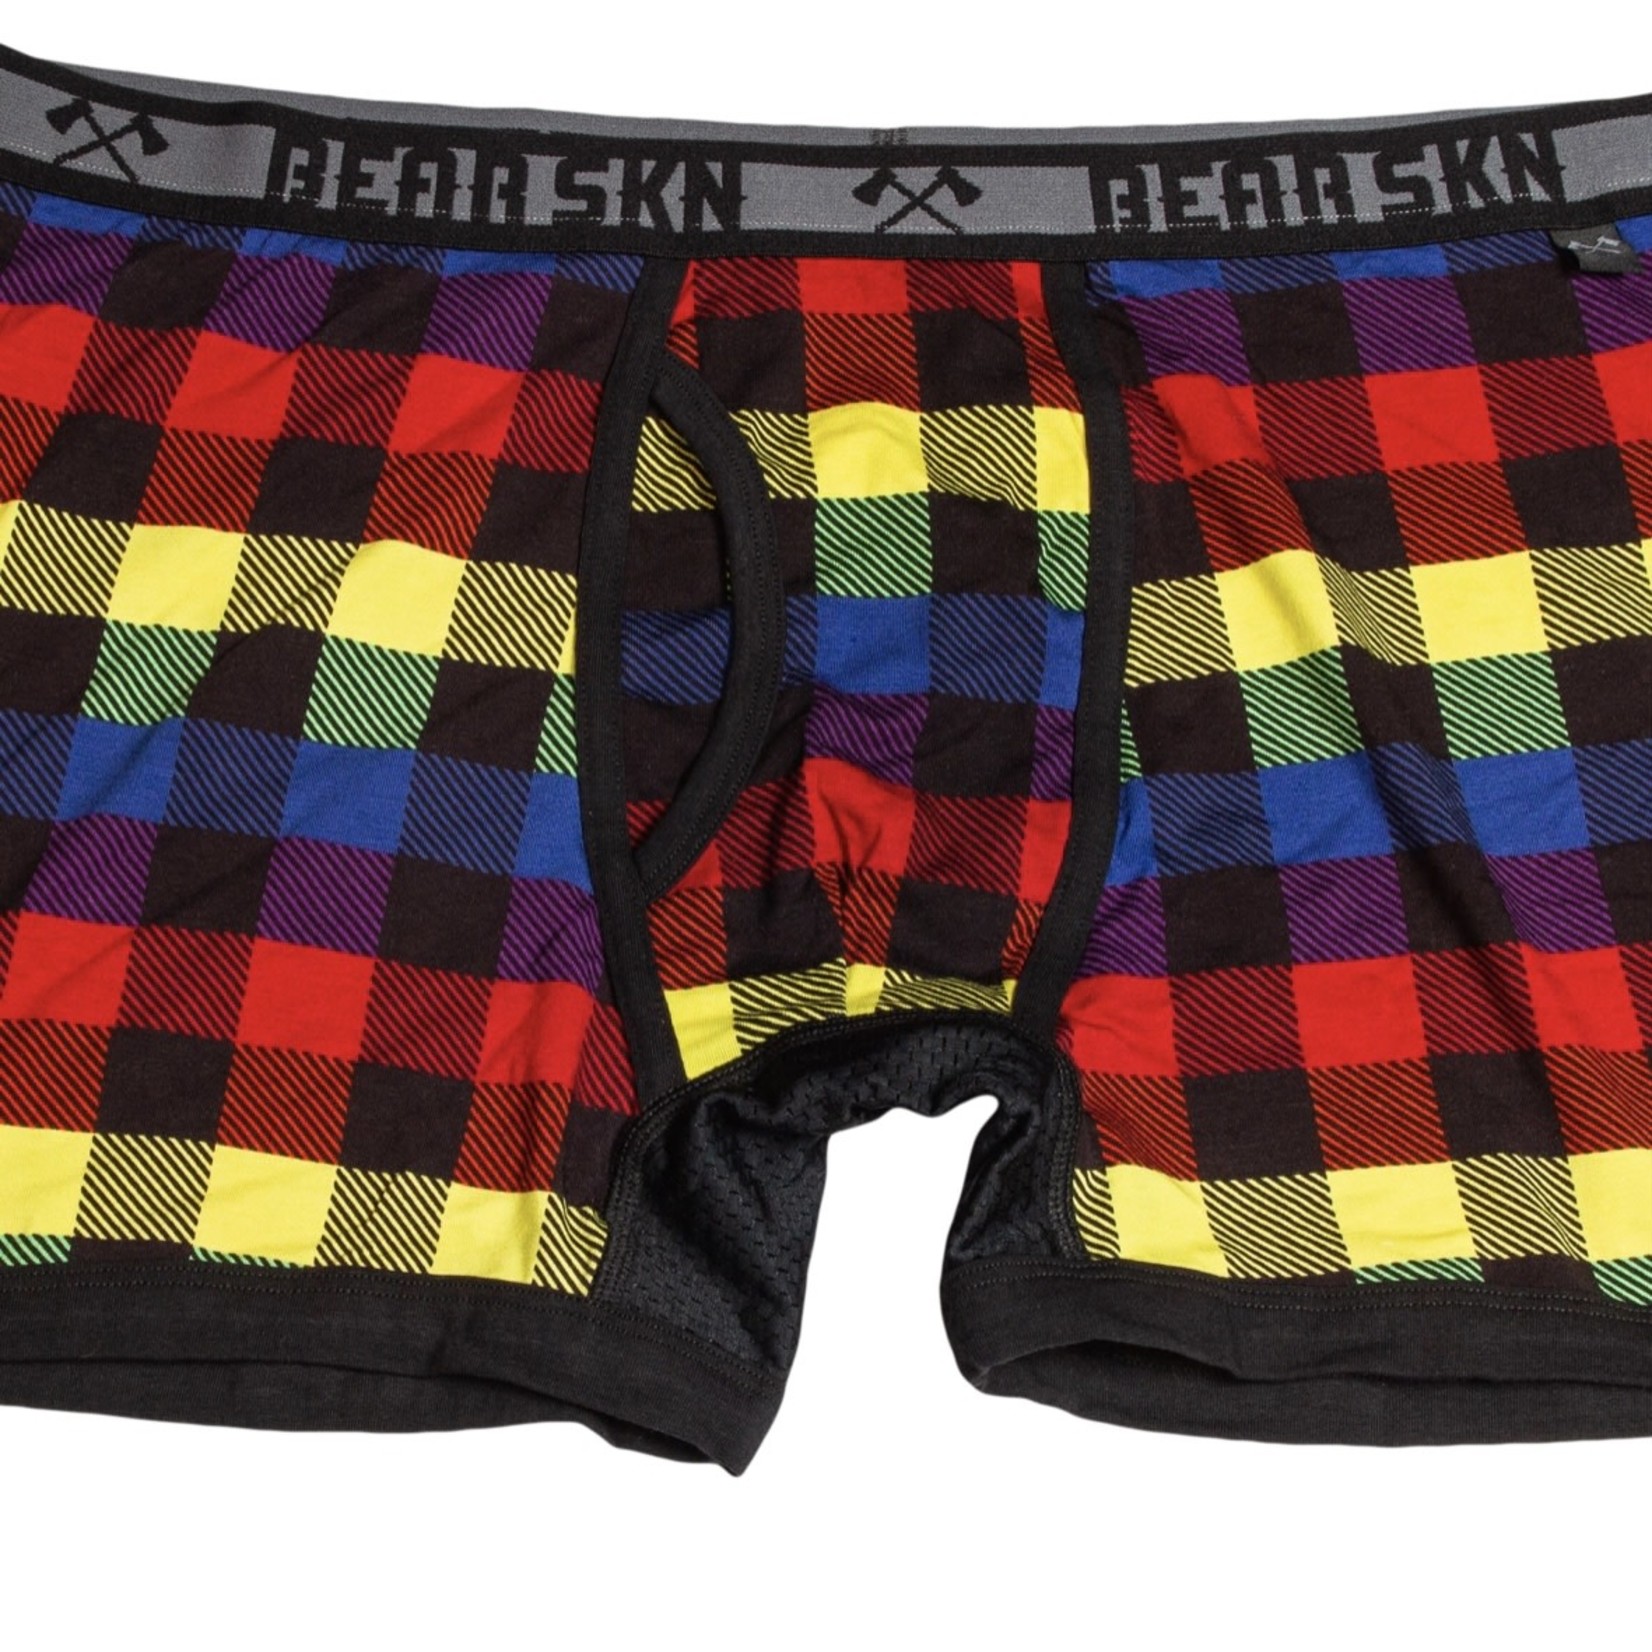 Bear Skn Drops New Bamboo Underwear Collection